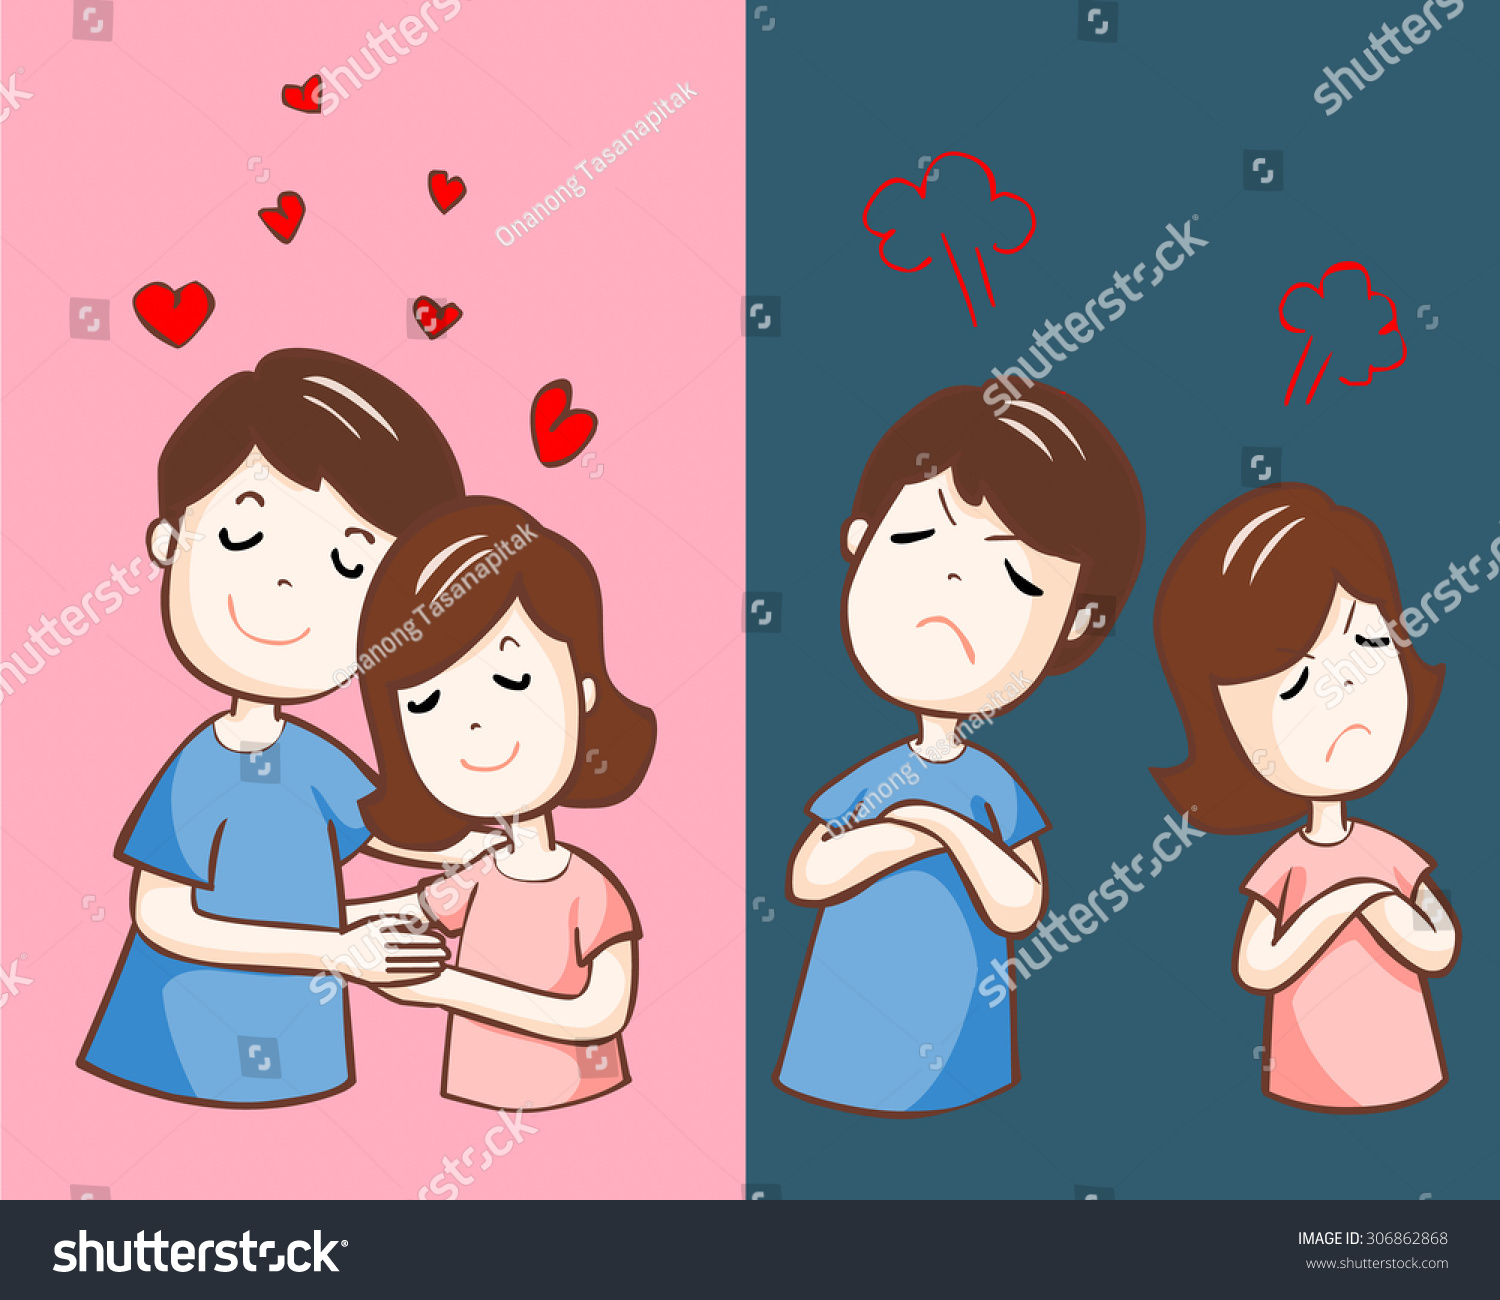 Download Lover Hate Love Each Other Vector Stock Vector 306862868 ...